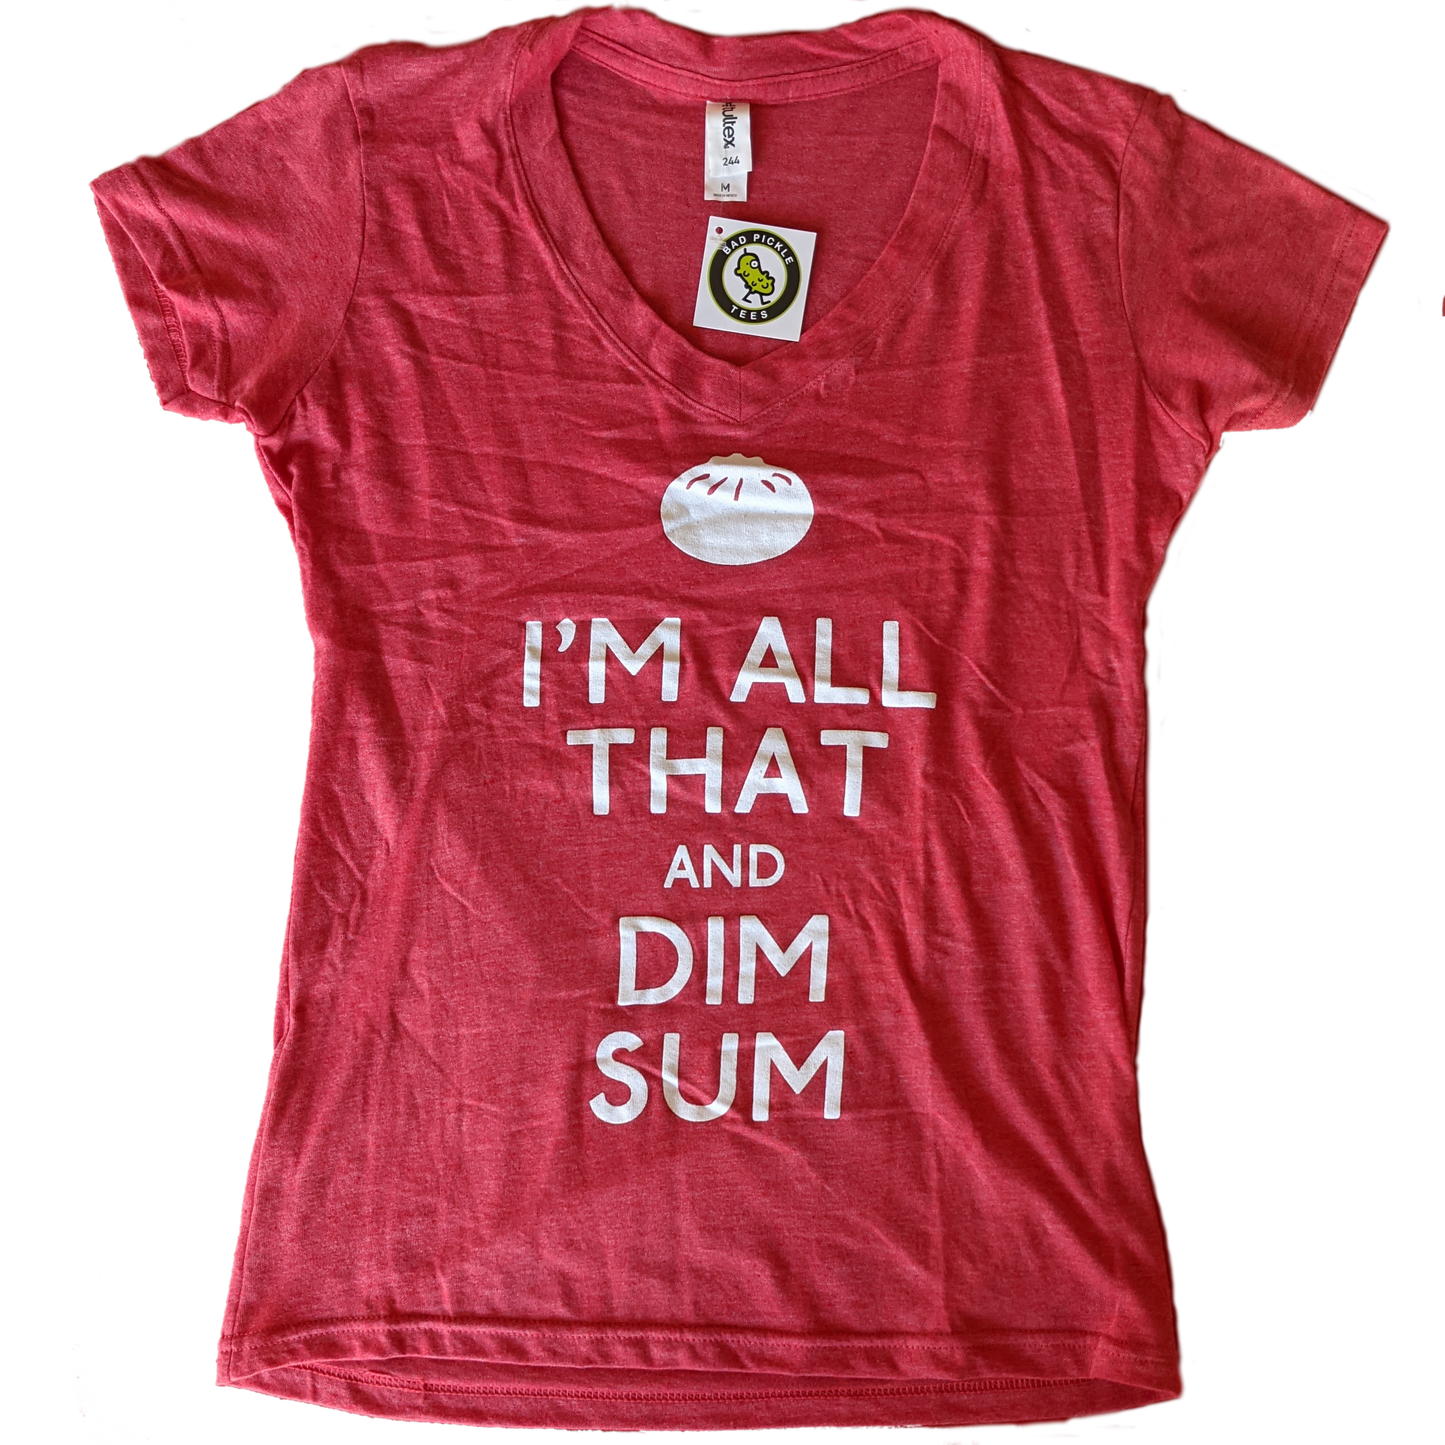 "I'm All That and Dim Sum" Women's V-neck T-shirt